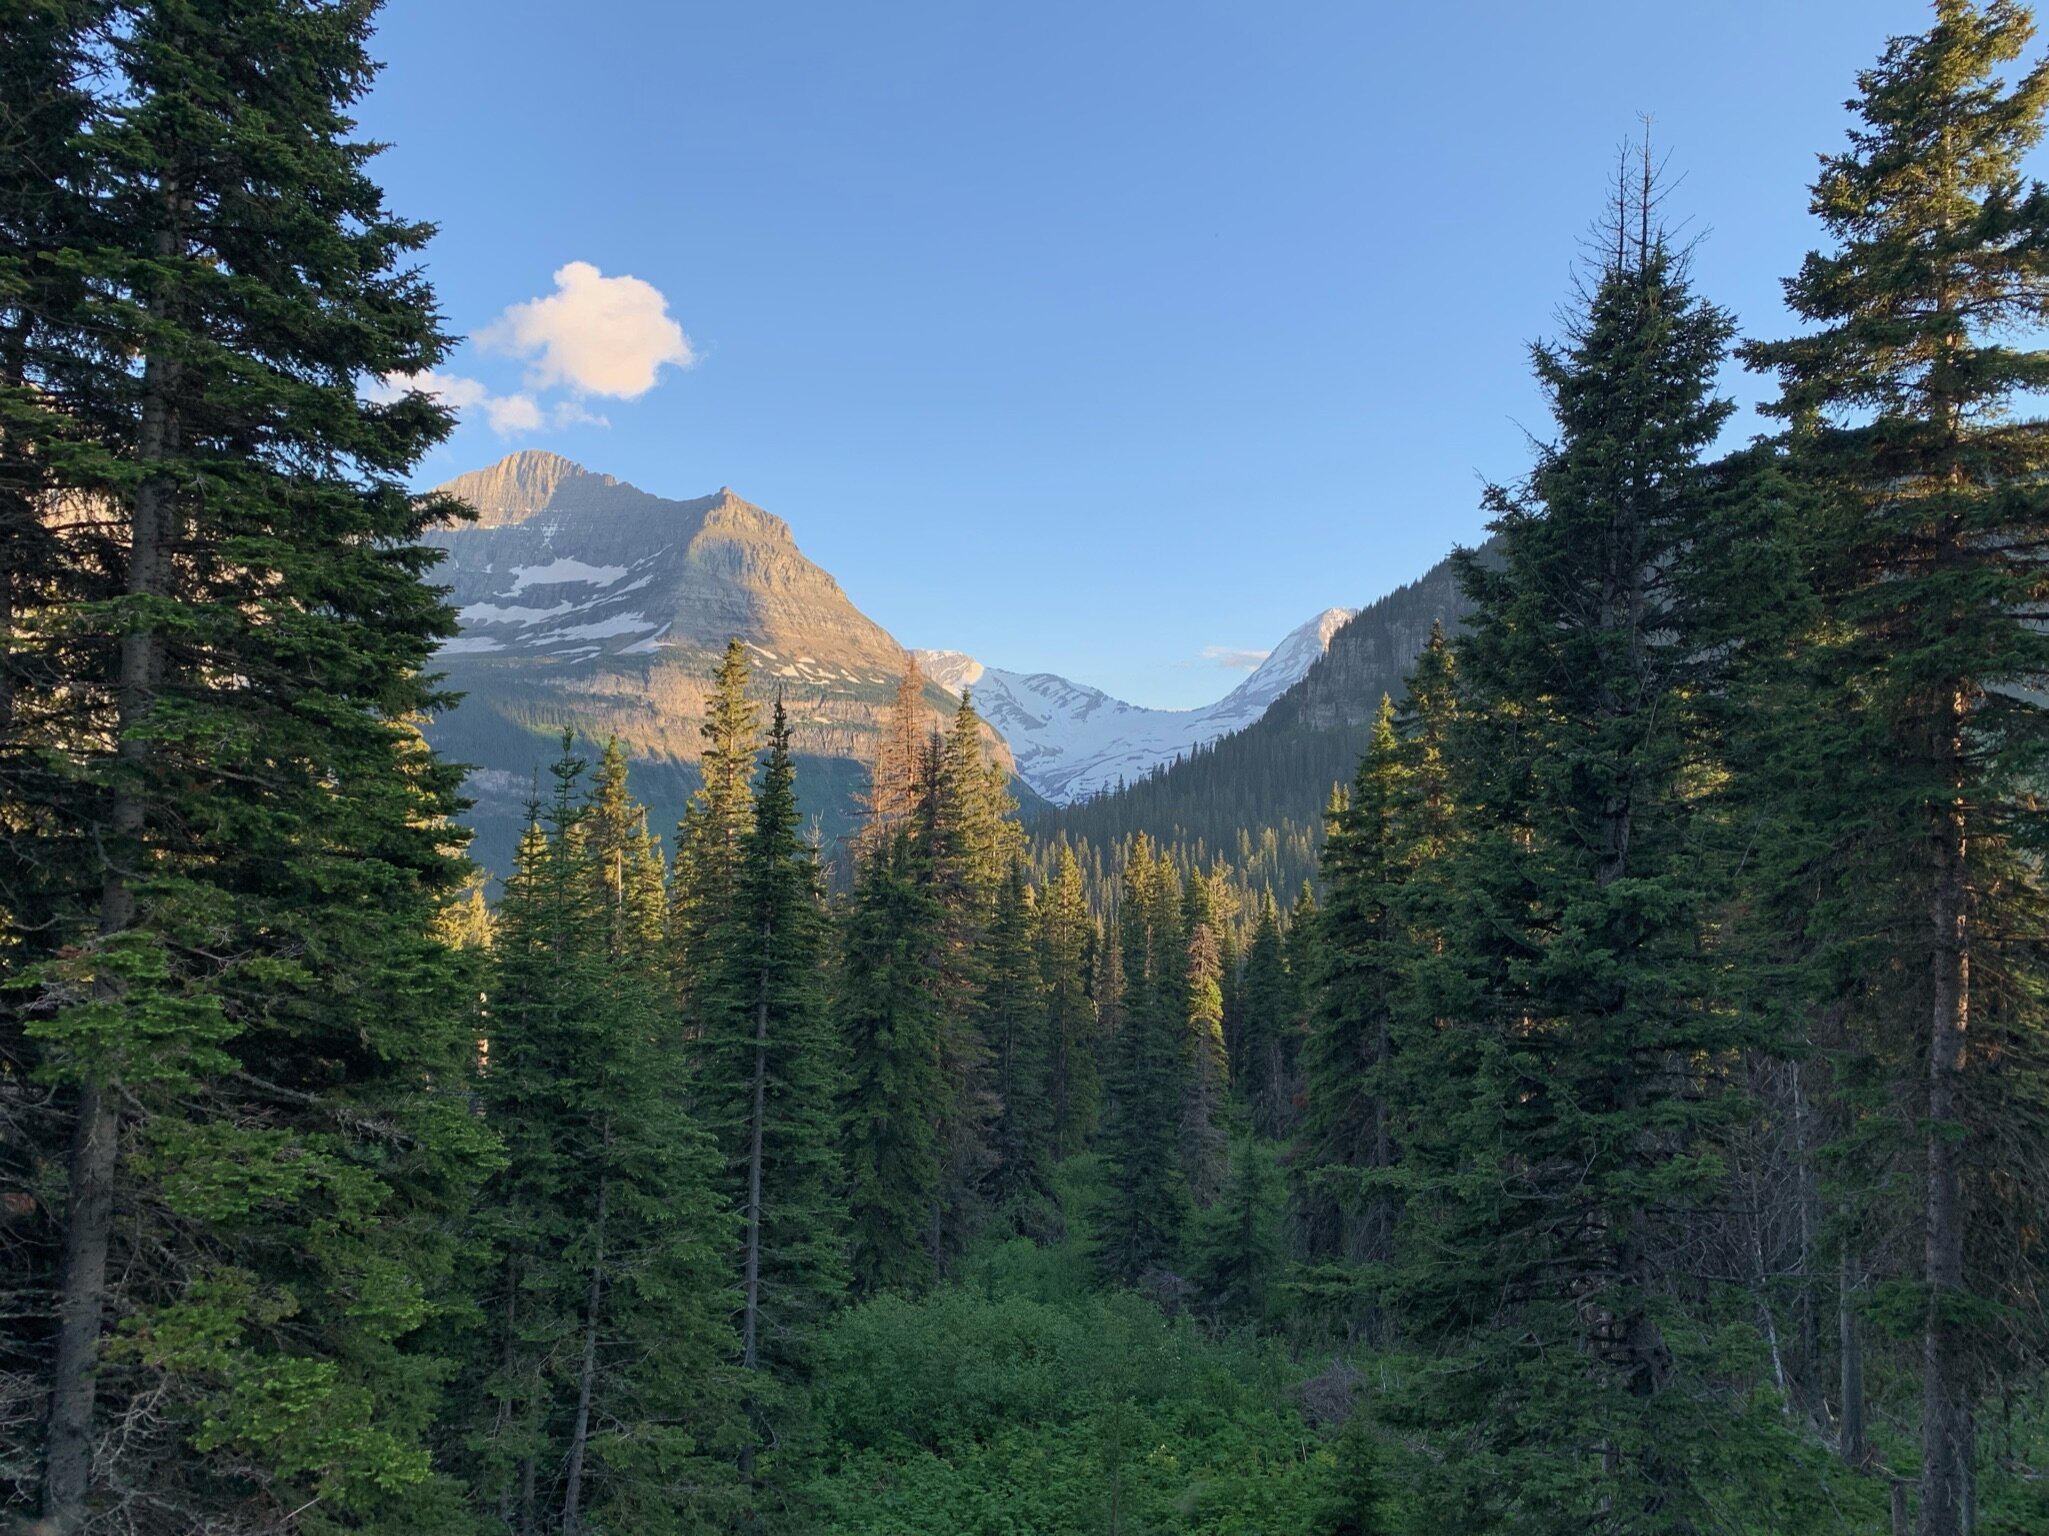 Jackson Glacier seen from Going to the Sun Road in Glacier National Park